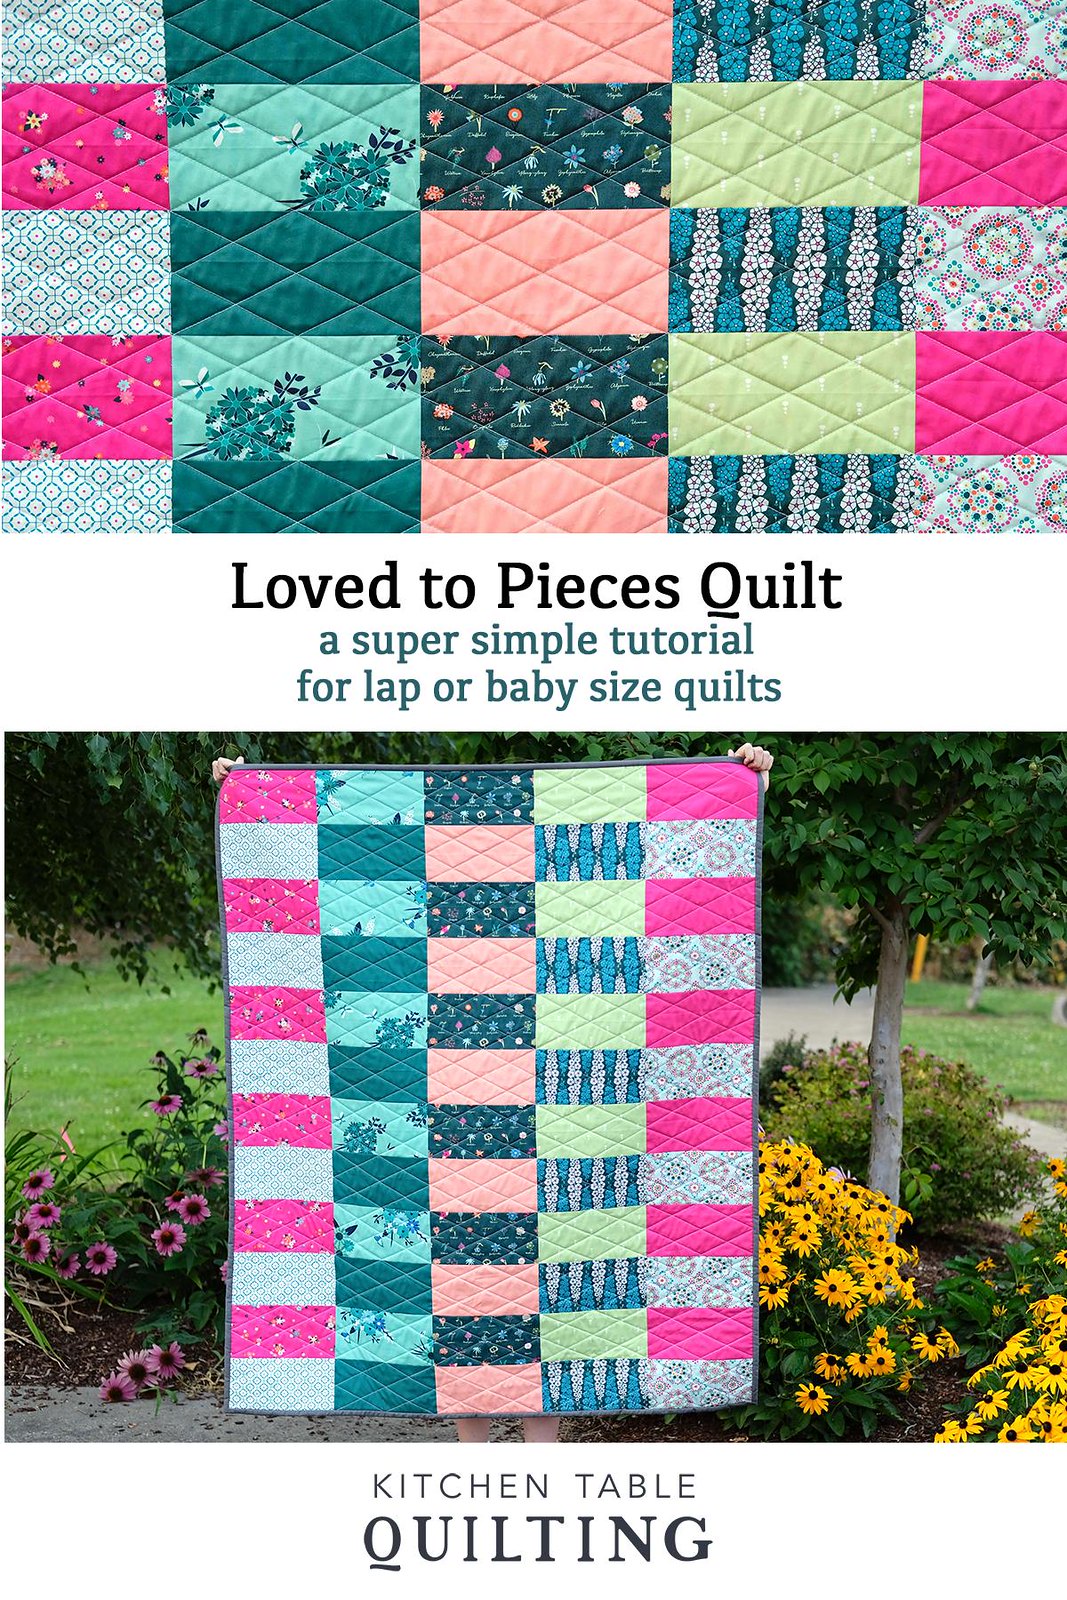 Loved to Pieces Super Simple, Beginner Friendly Quilt Tutorial - Kitchen Table Quilting